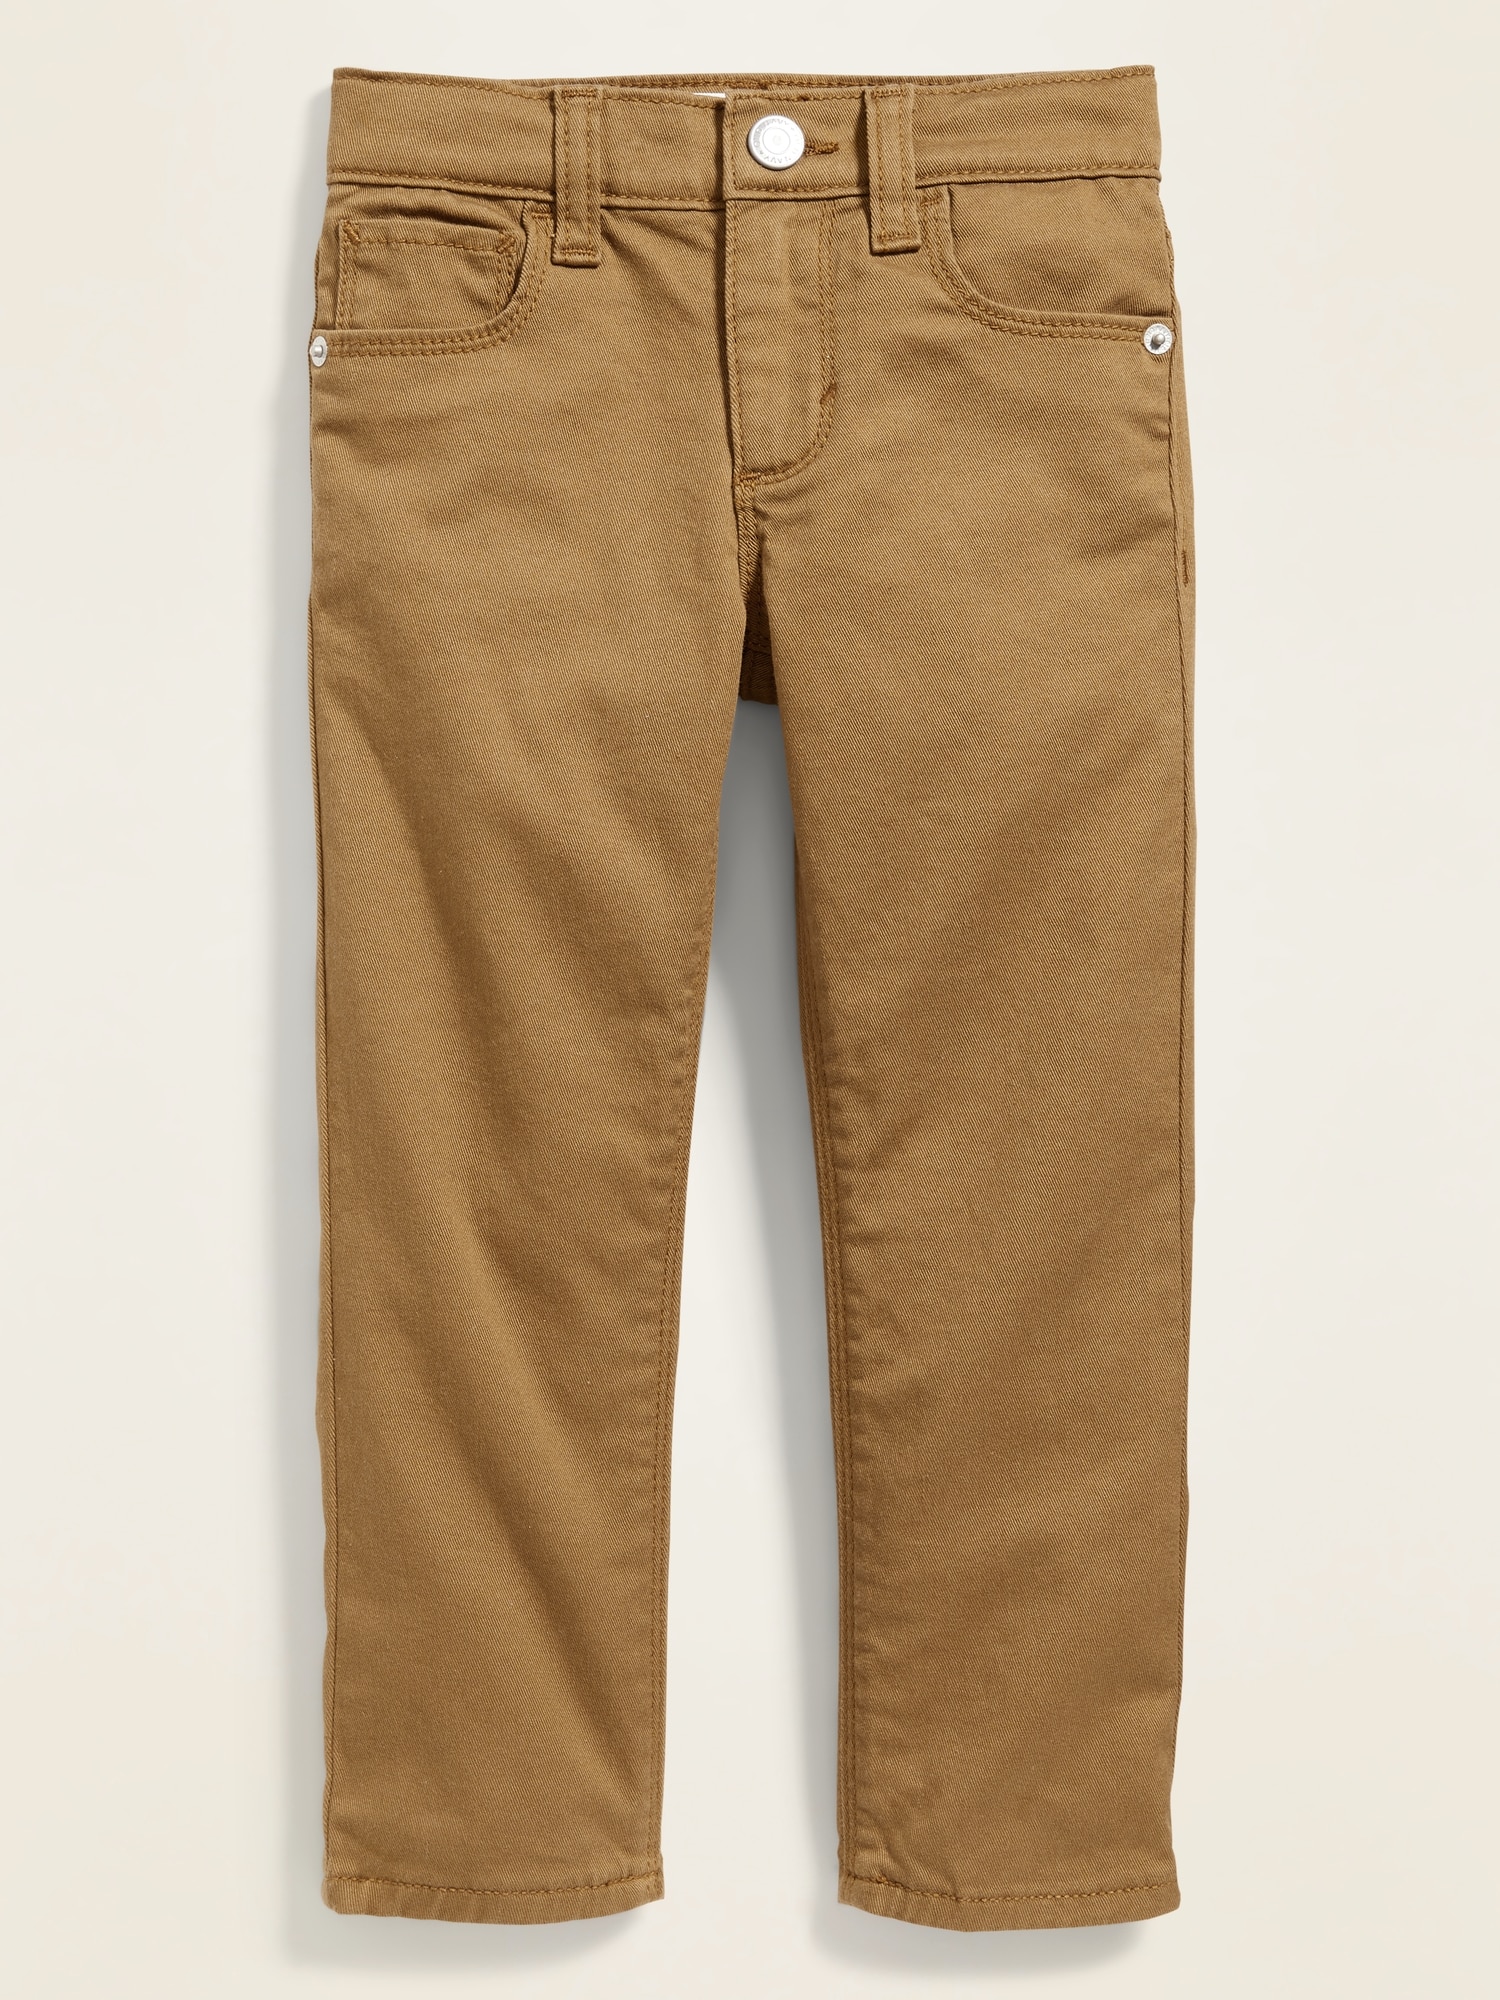 old navy tan jeans